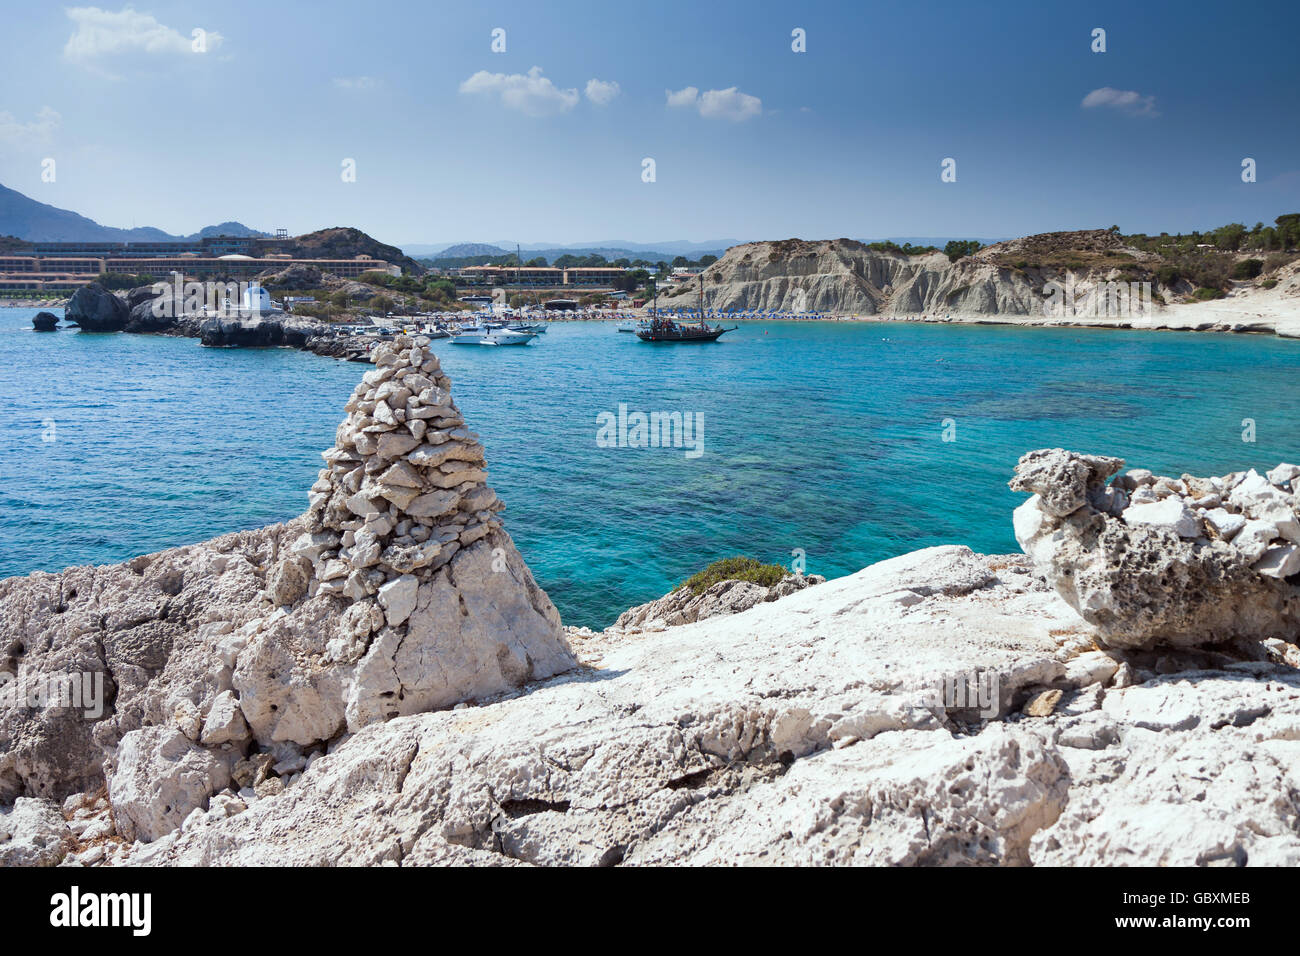 Kolymbia beach with the rocky coast in Greece. Cruise ship coming in the port. Stock Photo